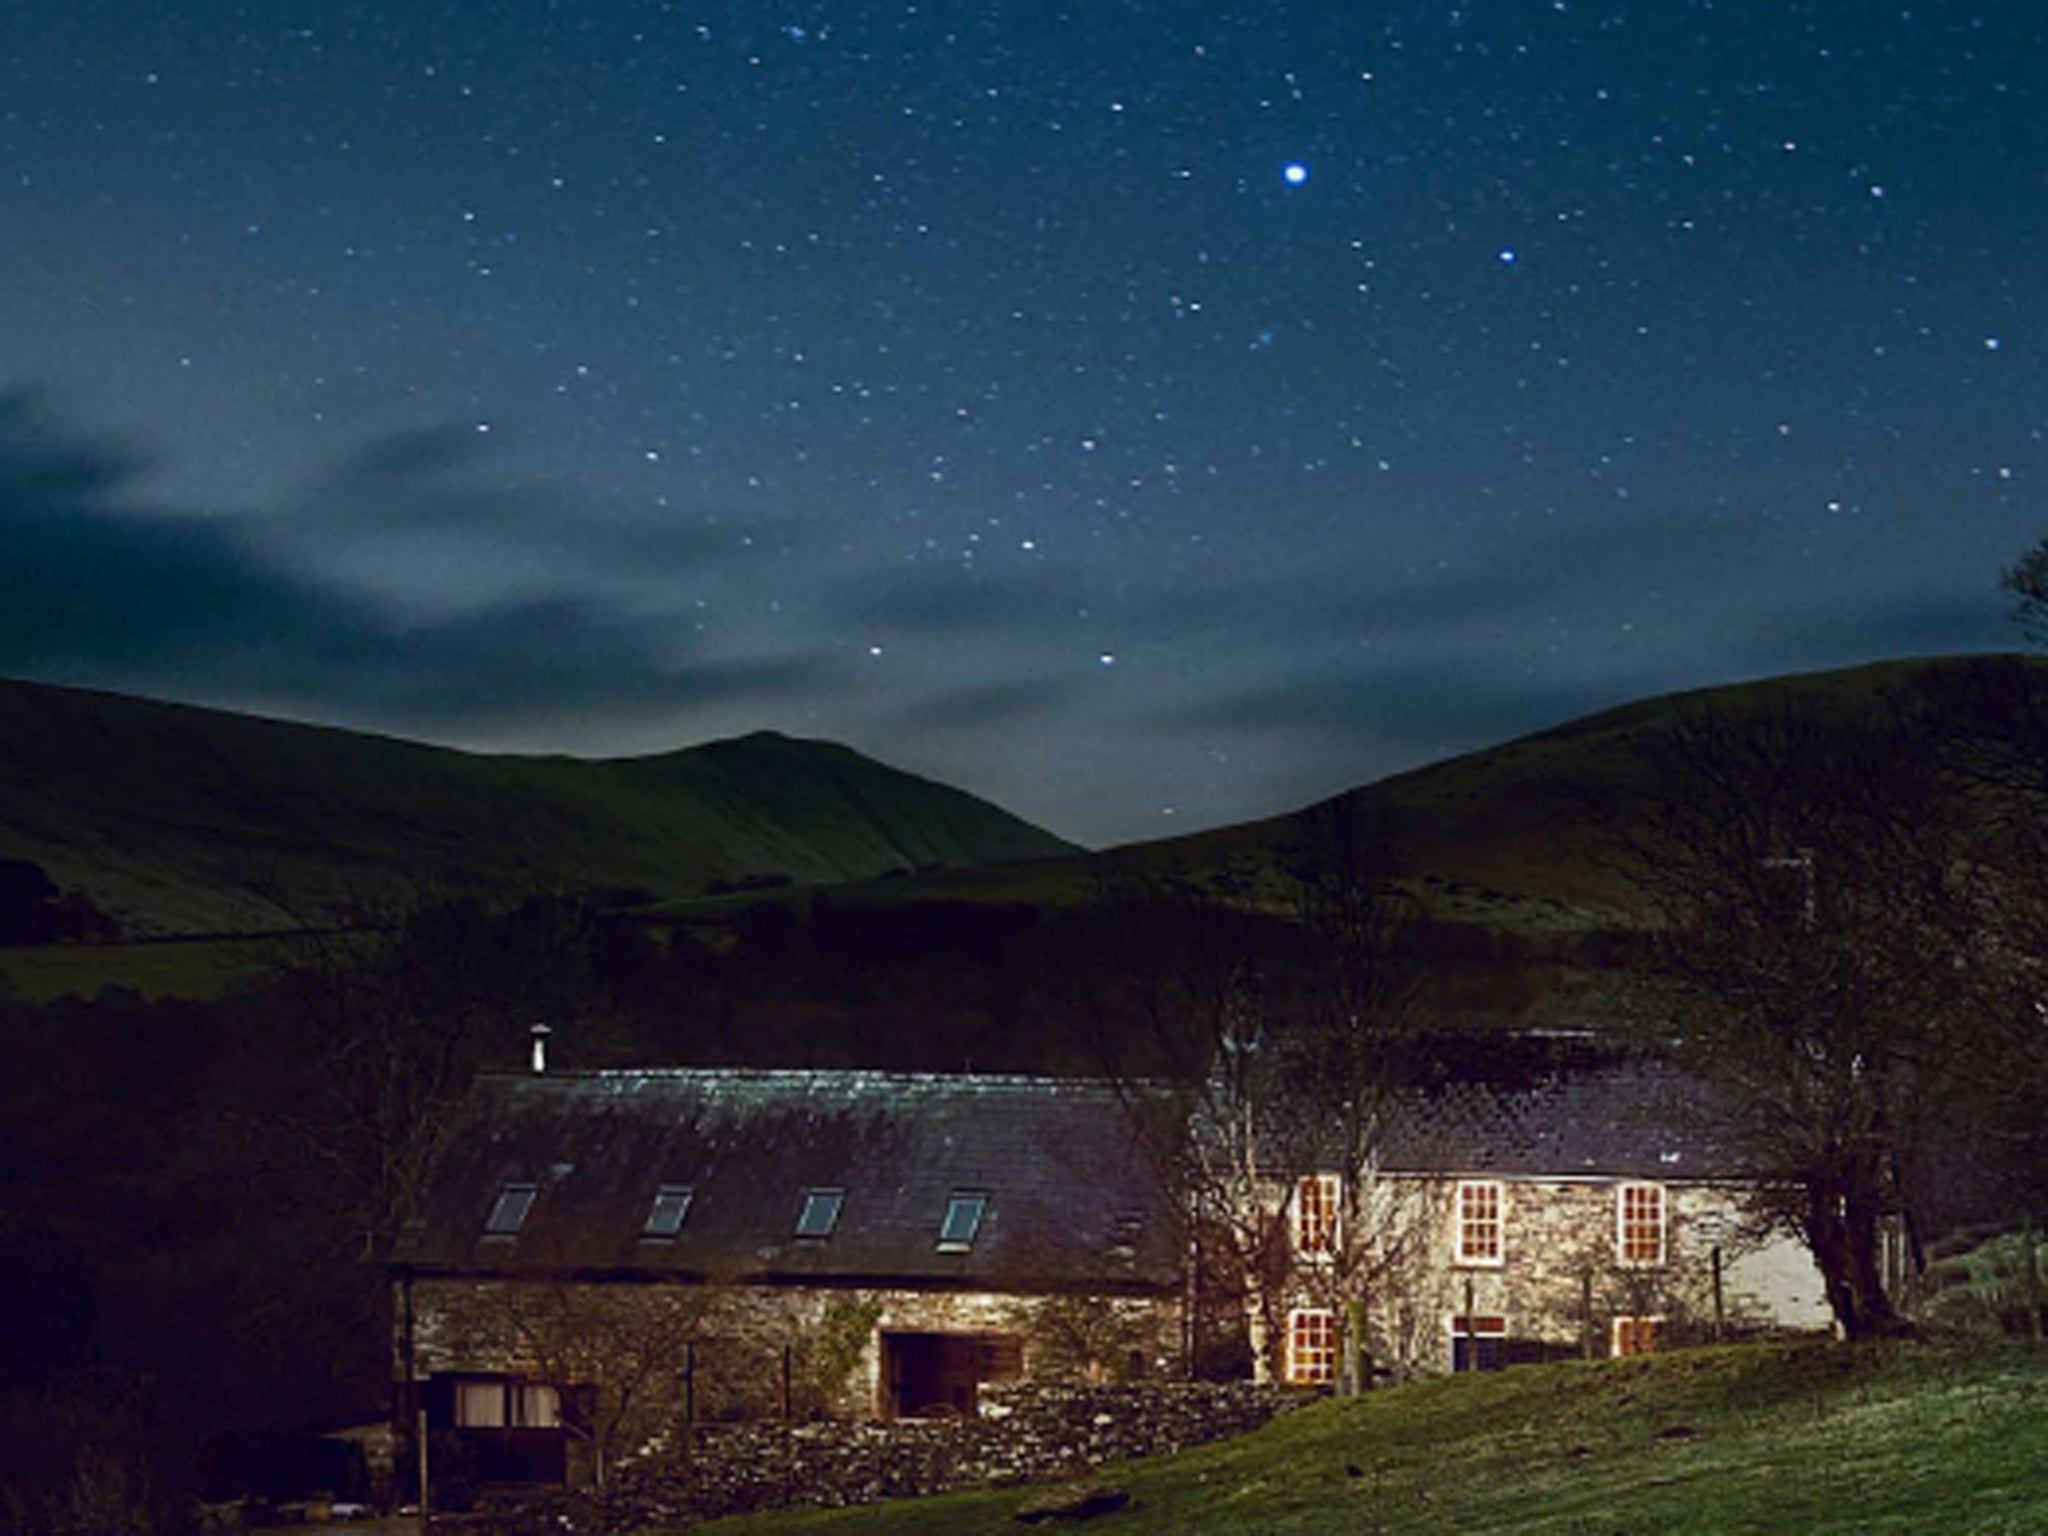 Heavens above: the starlit sky over the Brecon Beacons